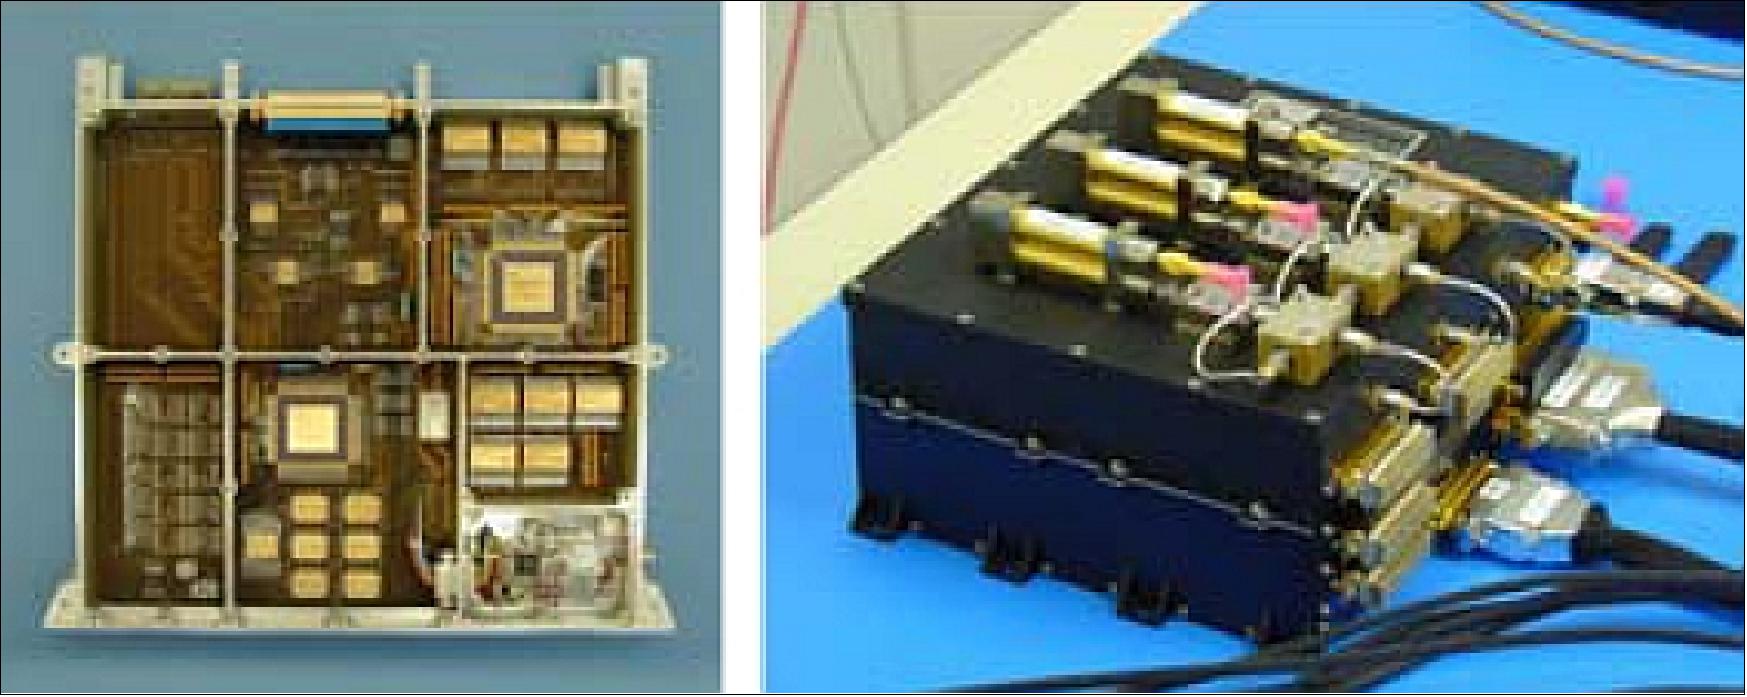 Figure 12: Photo of the MosaicGNSS (left) and IGOR (right) devices (image credit: DLR)